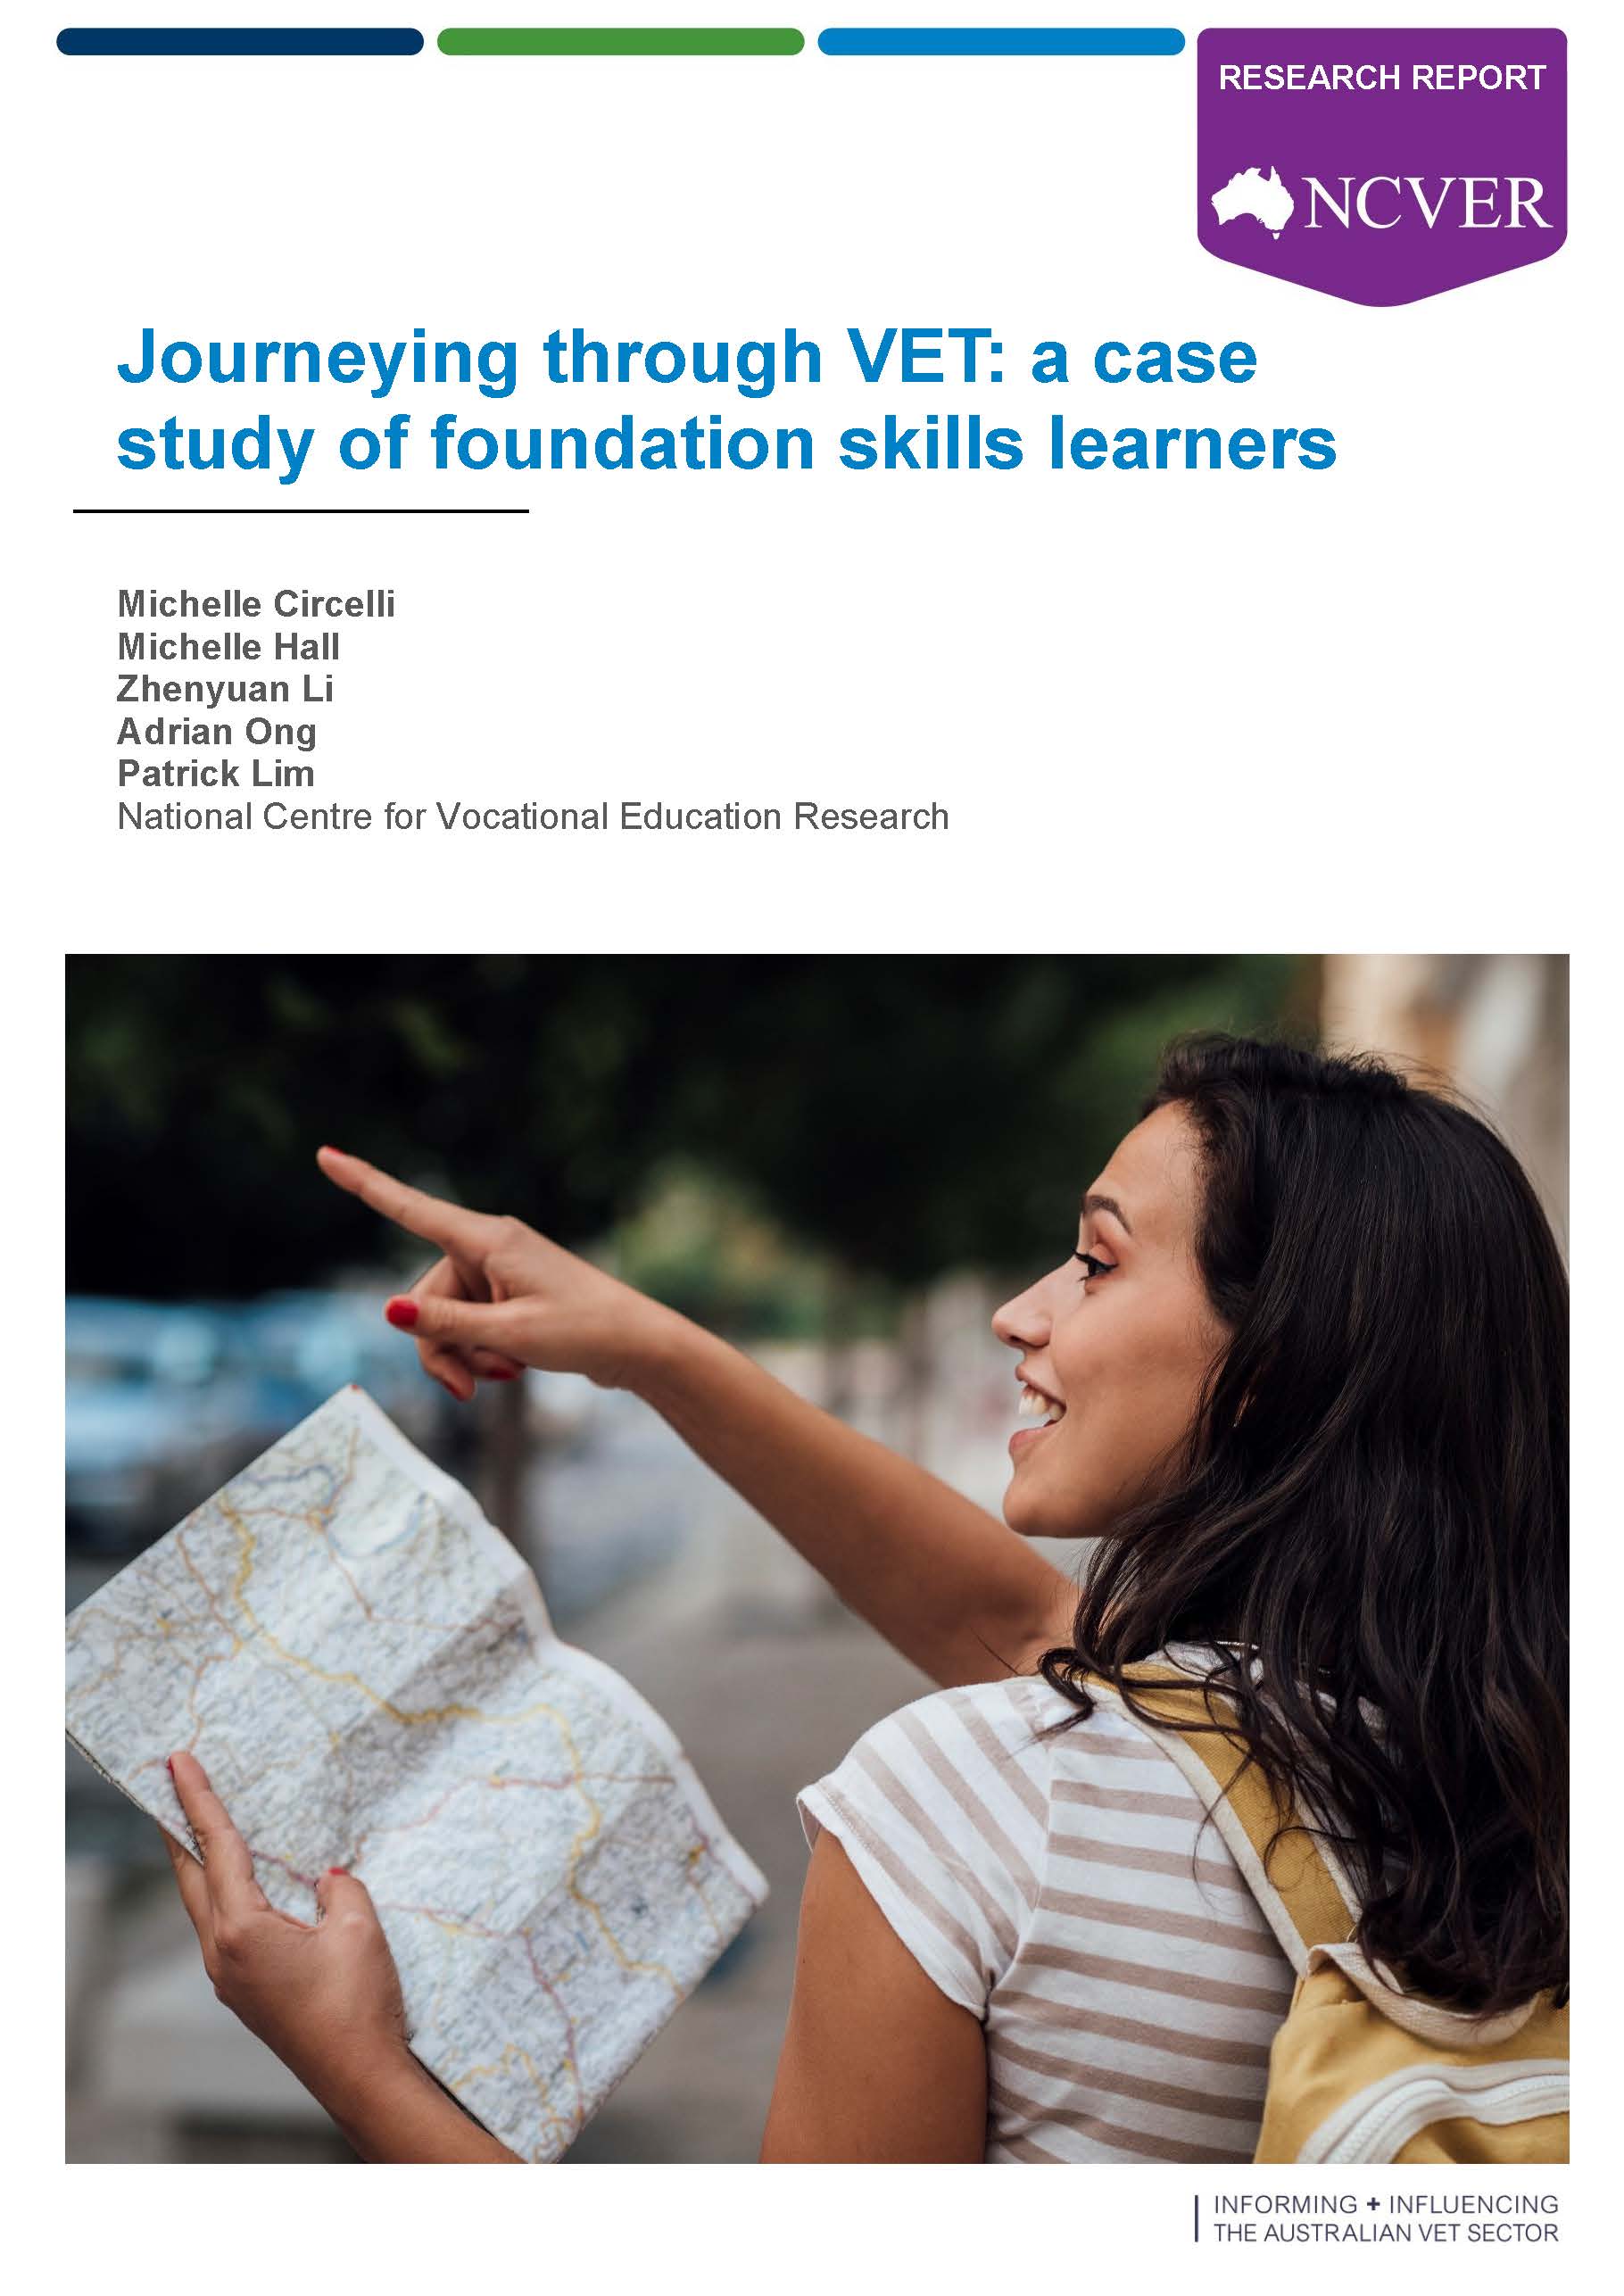 Journeying through VET: a case study of foundation skills learners